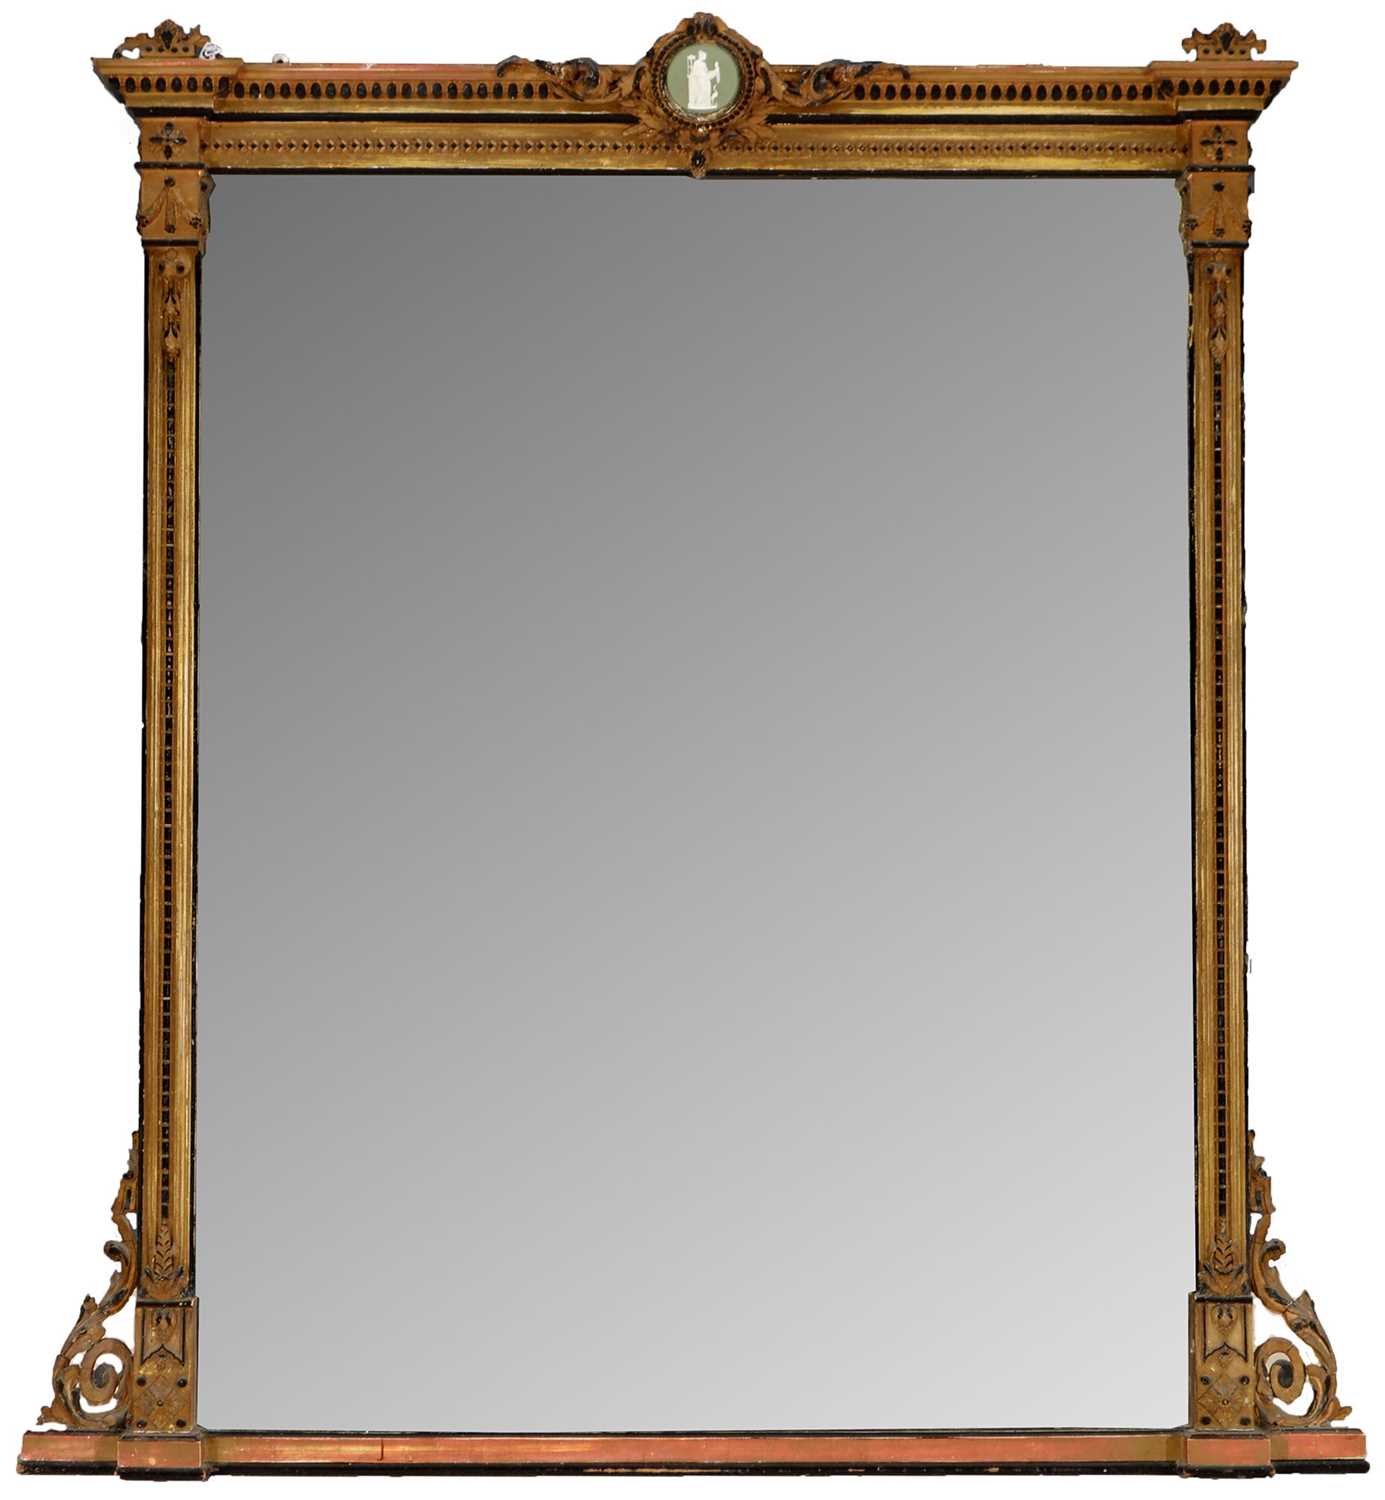 Lot 1164 - late 19th century parcel gilt and gesso overmantel mirror